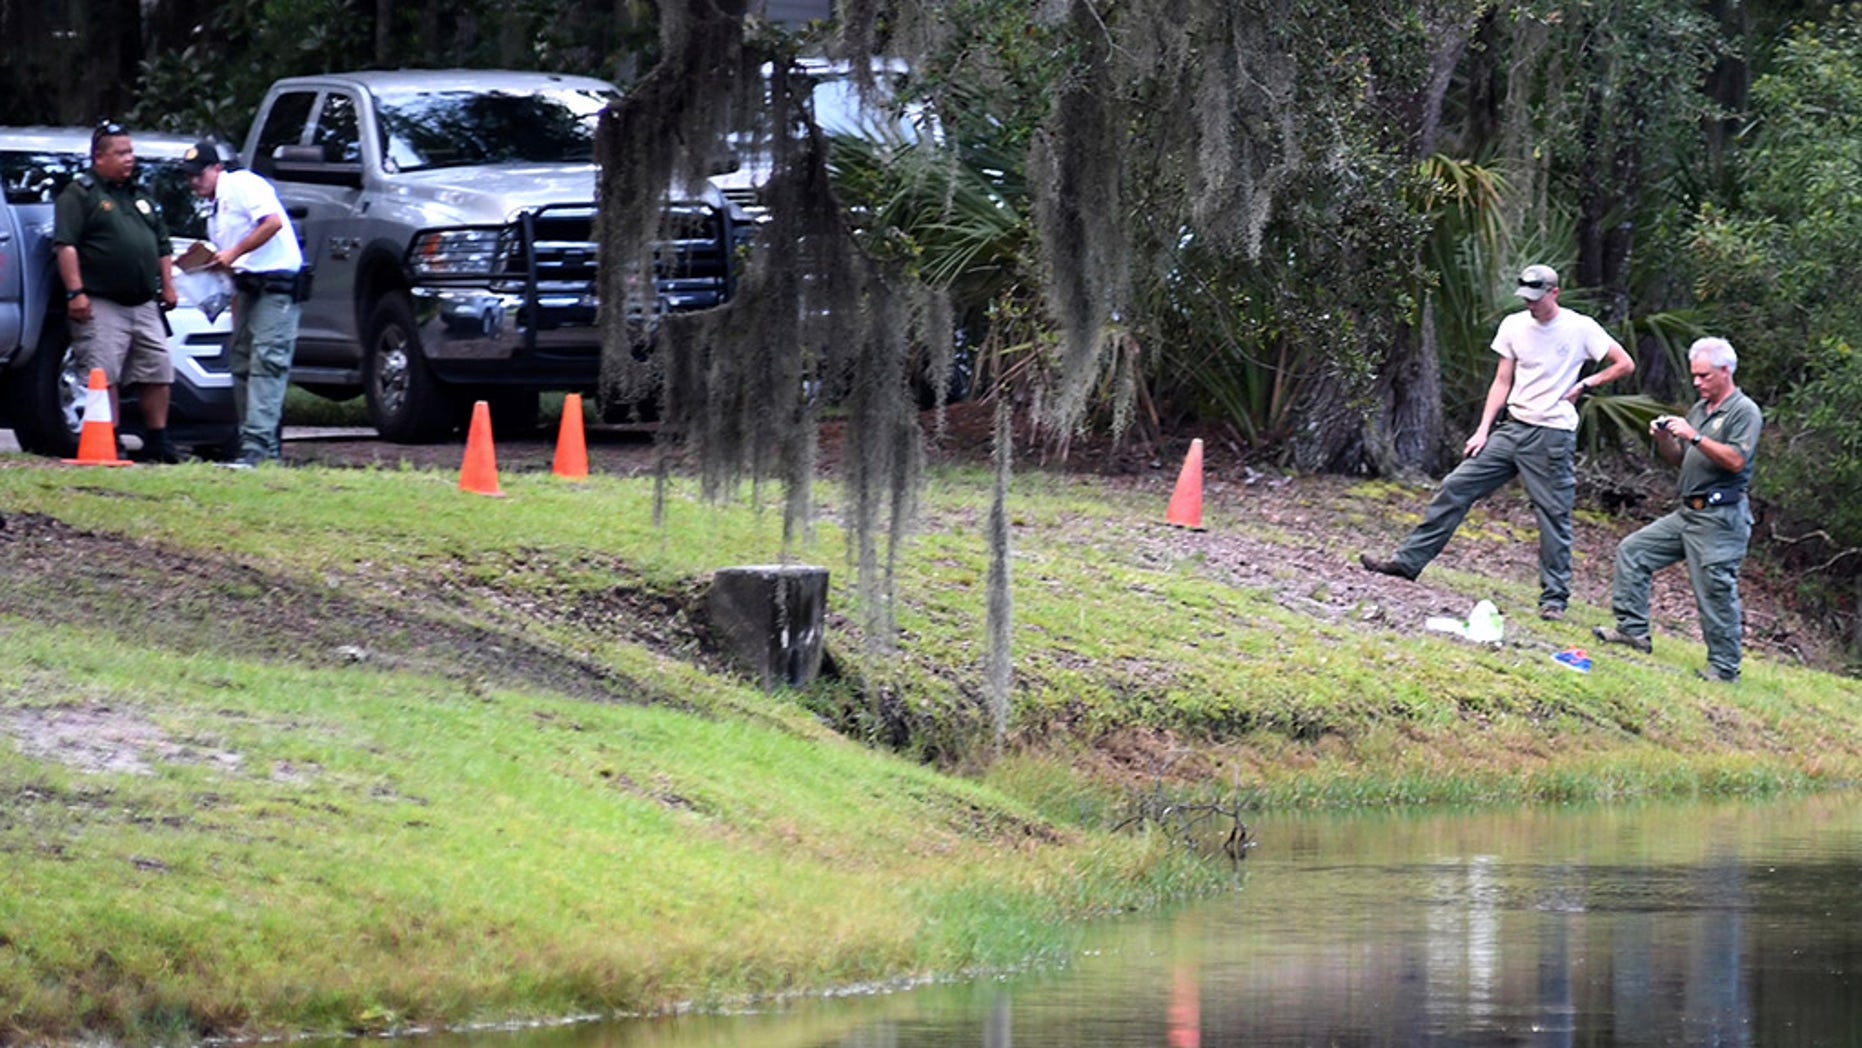 Woman killed after alligator dragged her into Hilton Head lagoon was